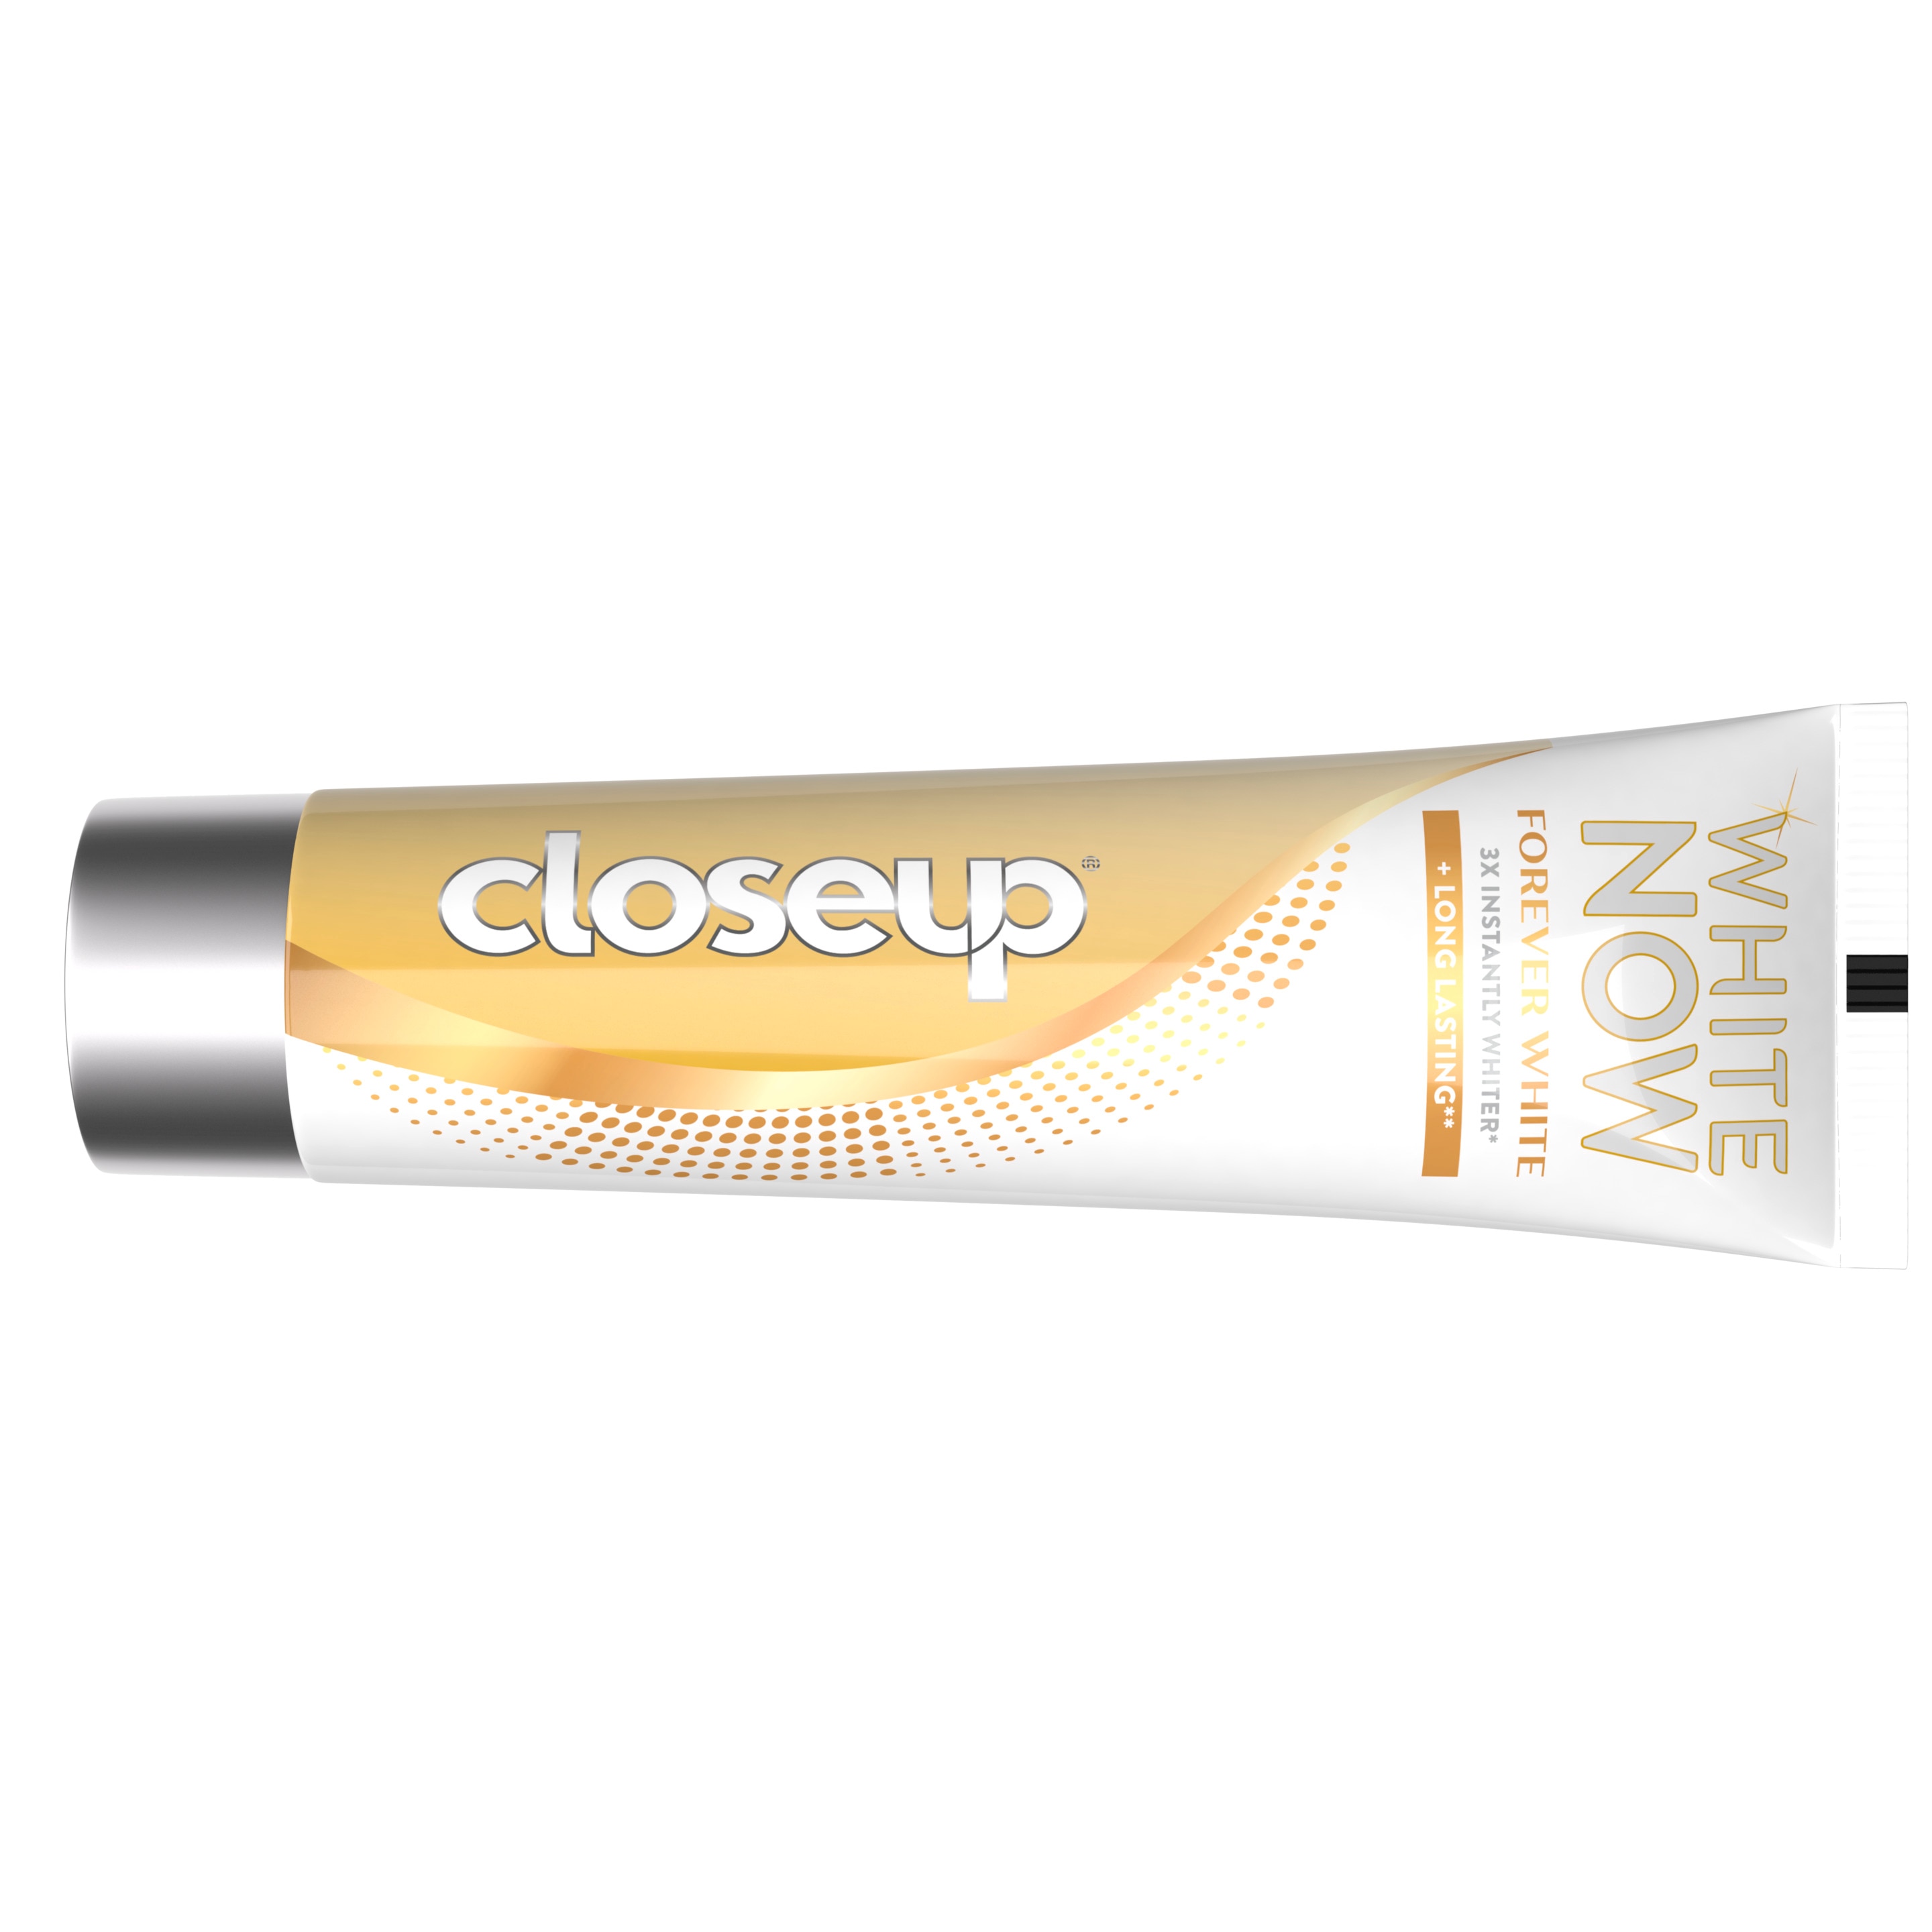 CLOSE UP WHITE NOW INSTANT WHITENING TOOTHPASTE FOREVER WHITE 75 ML